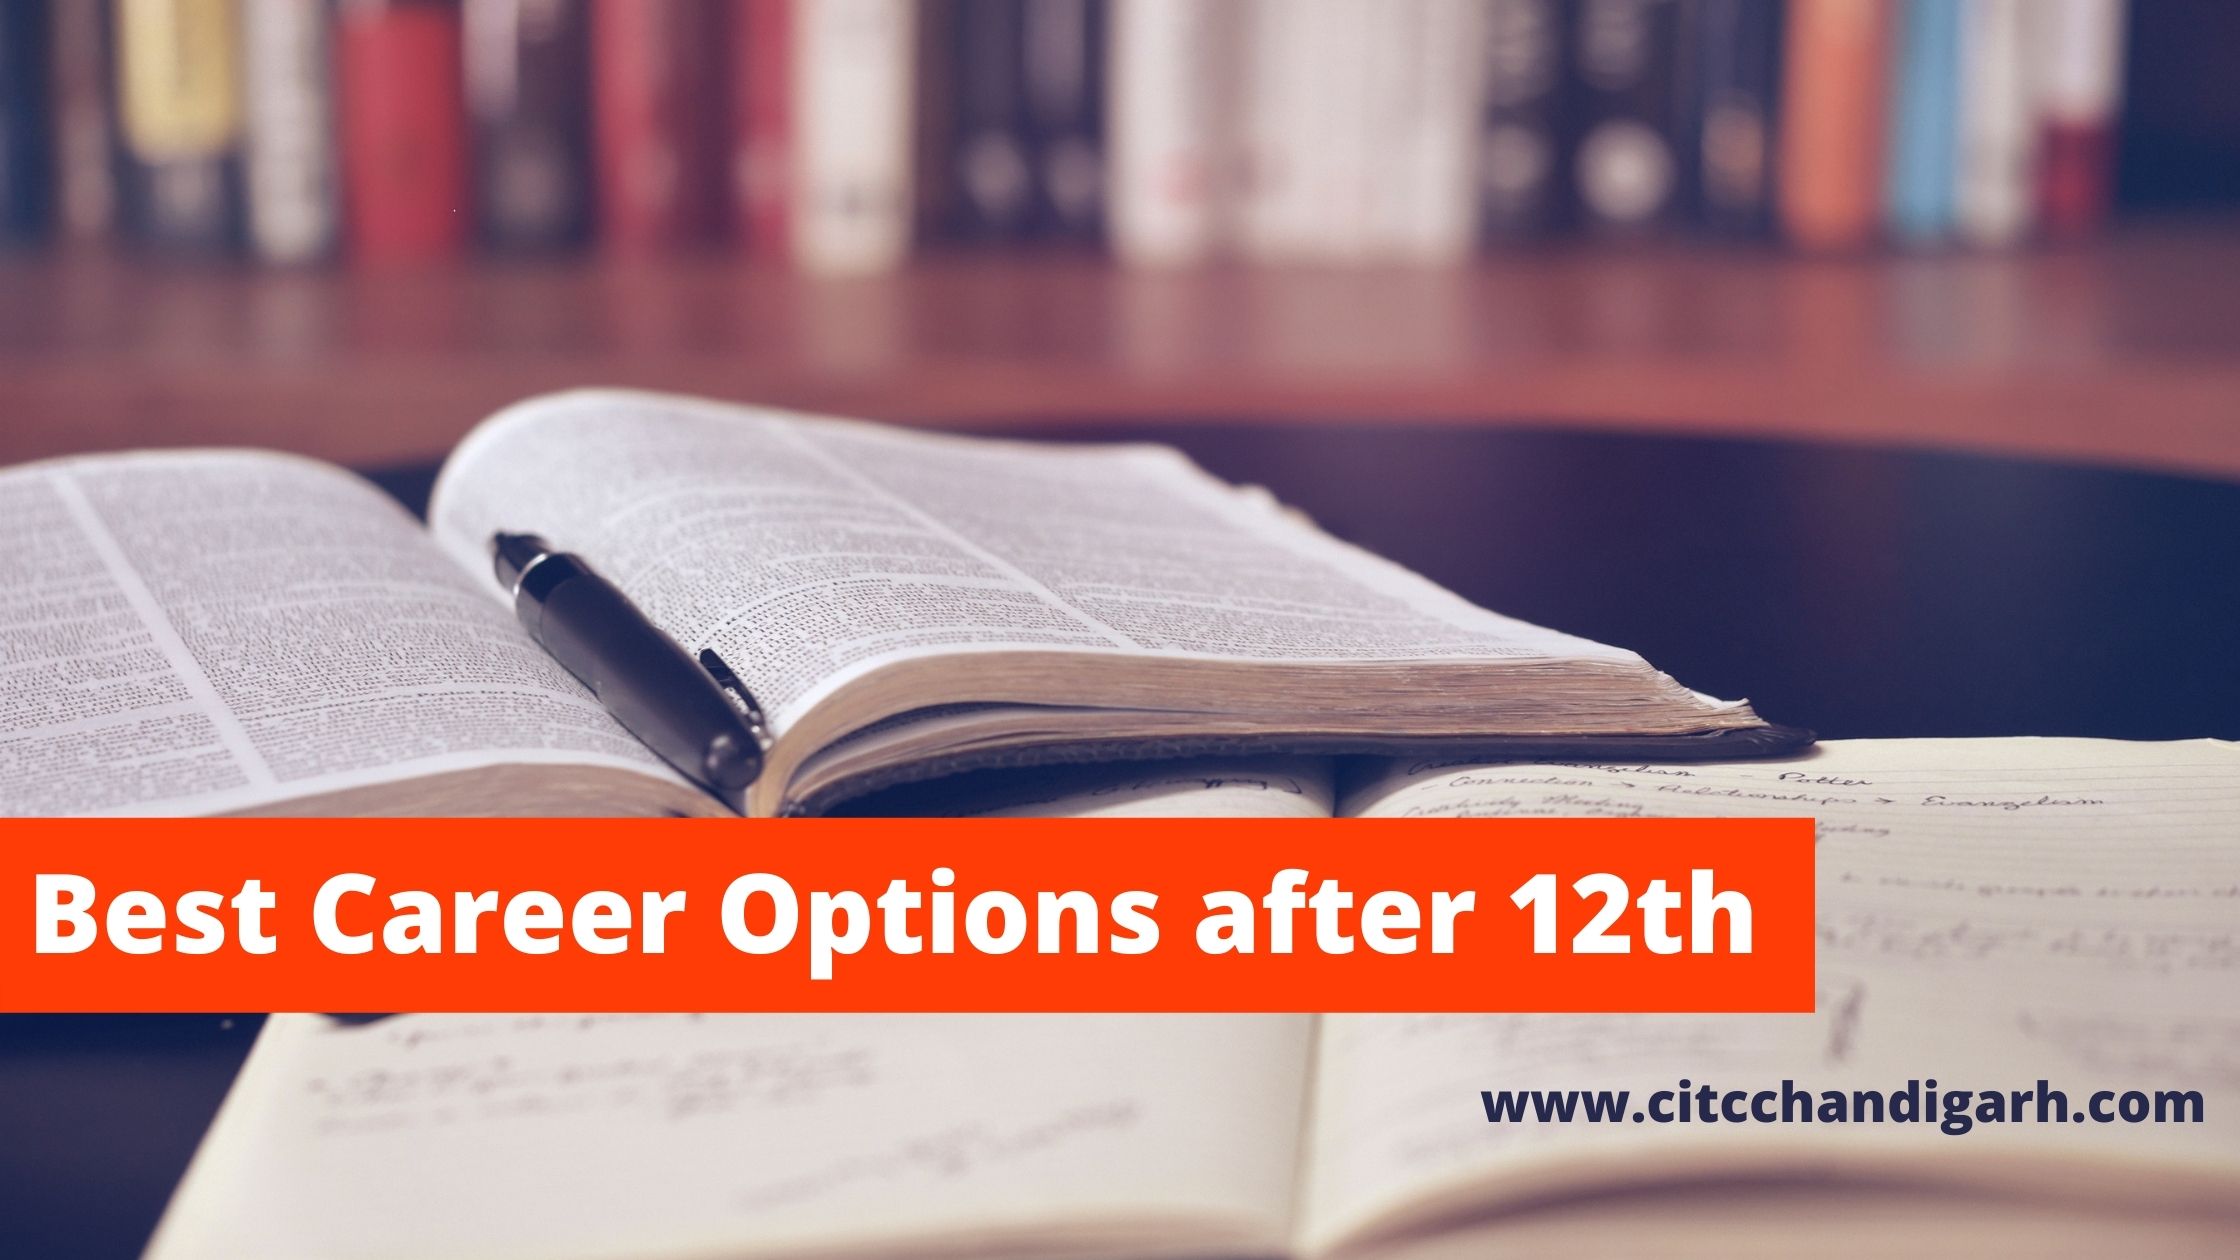 Best Career Options after 12th